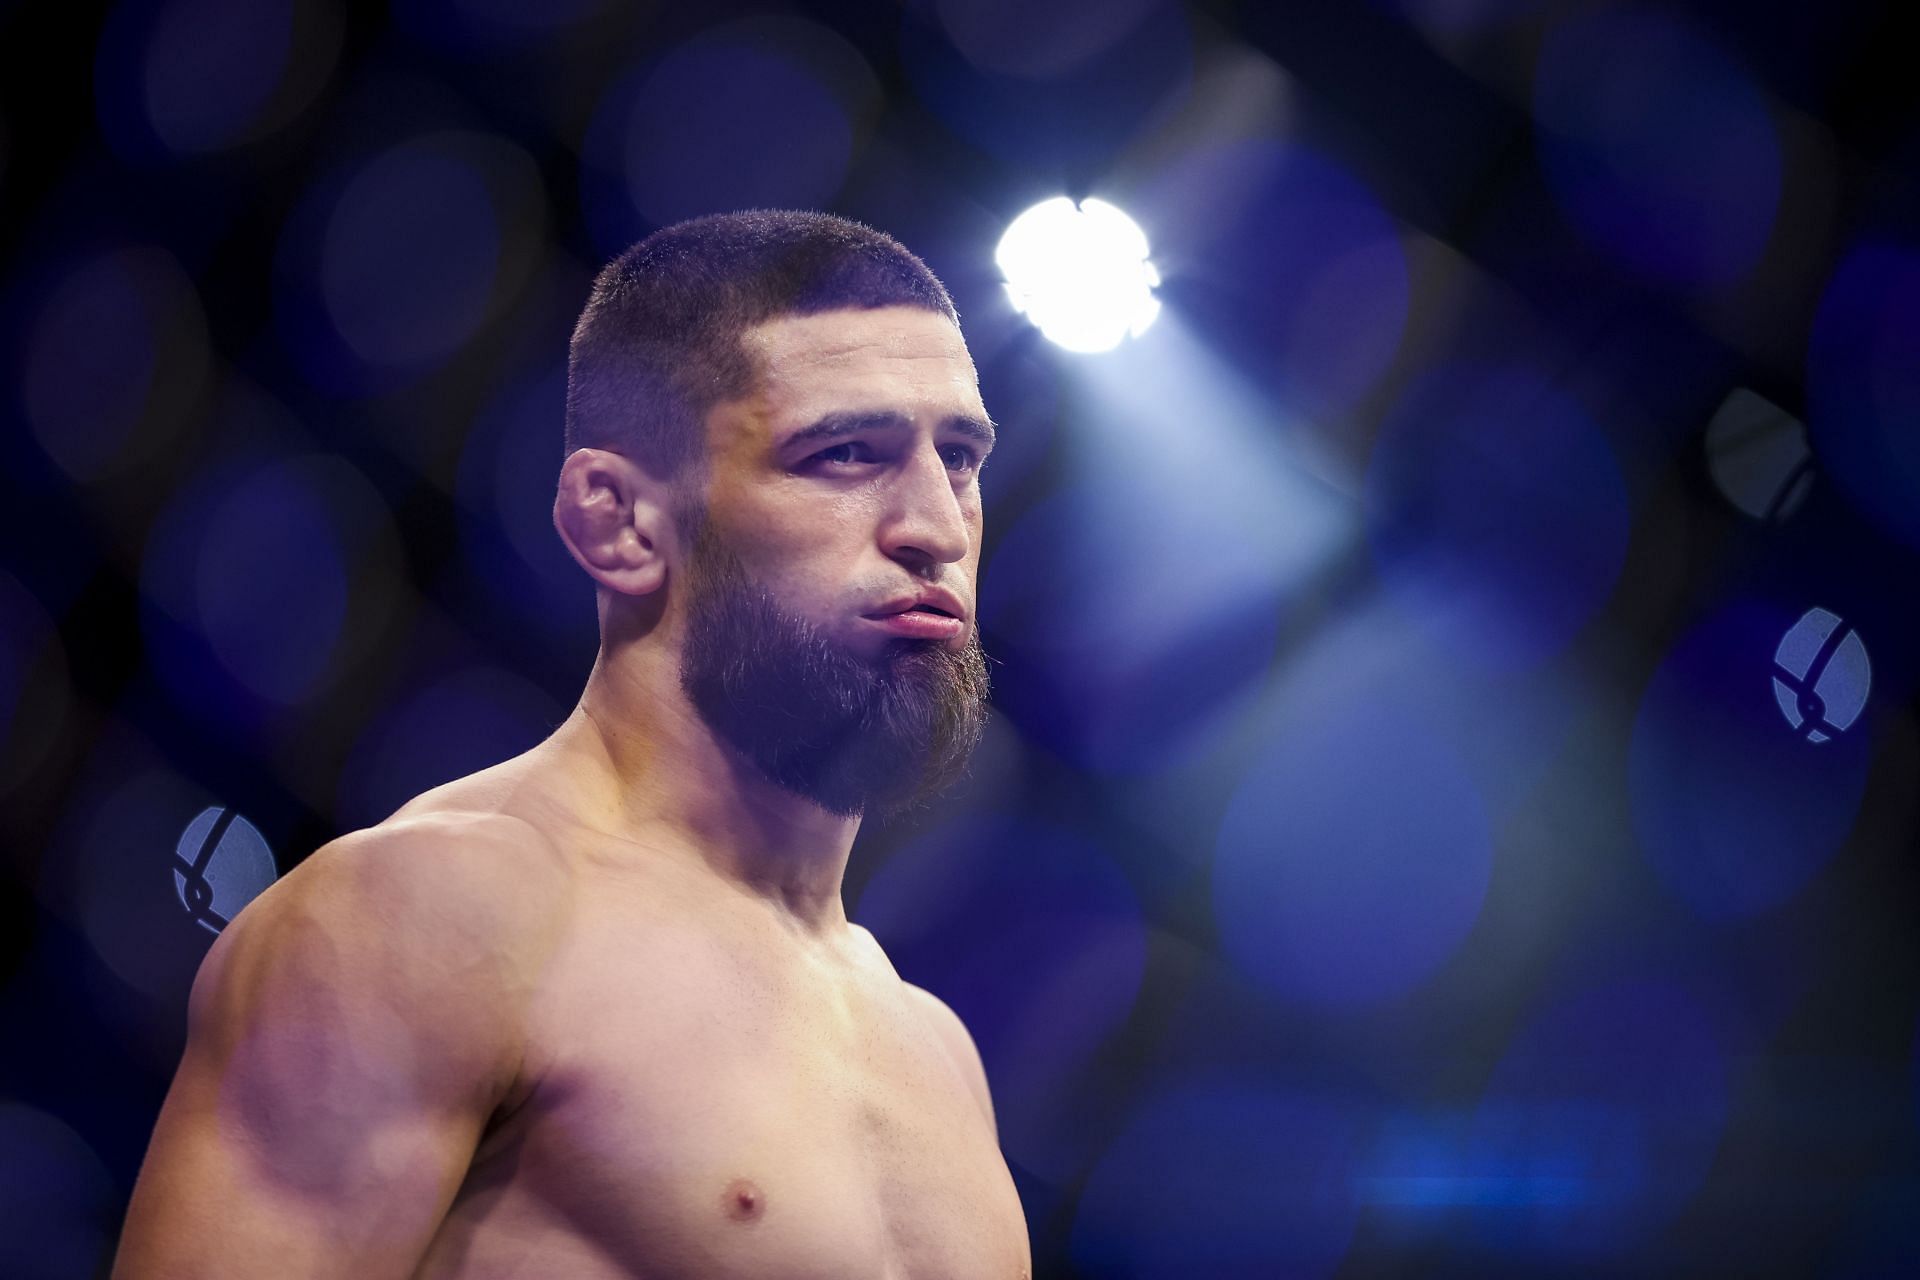 The UFC intended to match Nate Diaz with Khamzat Chimaev in his final fight with them